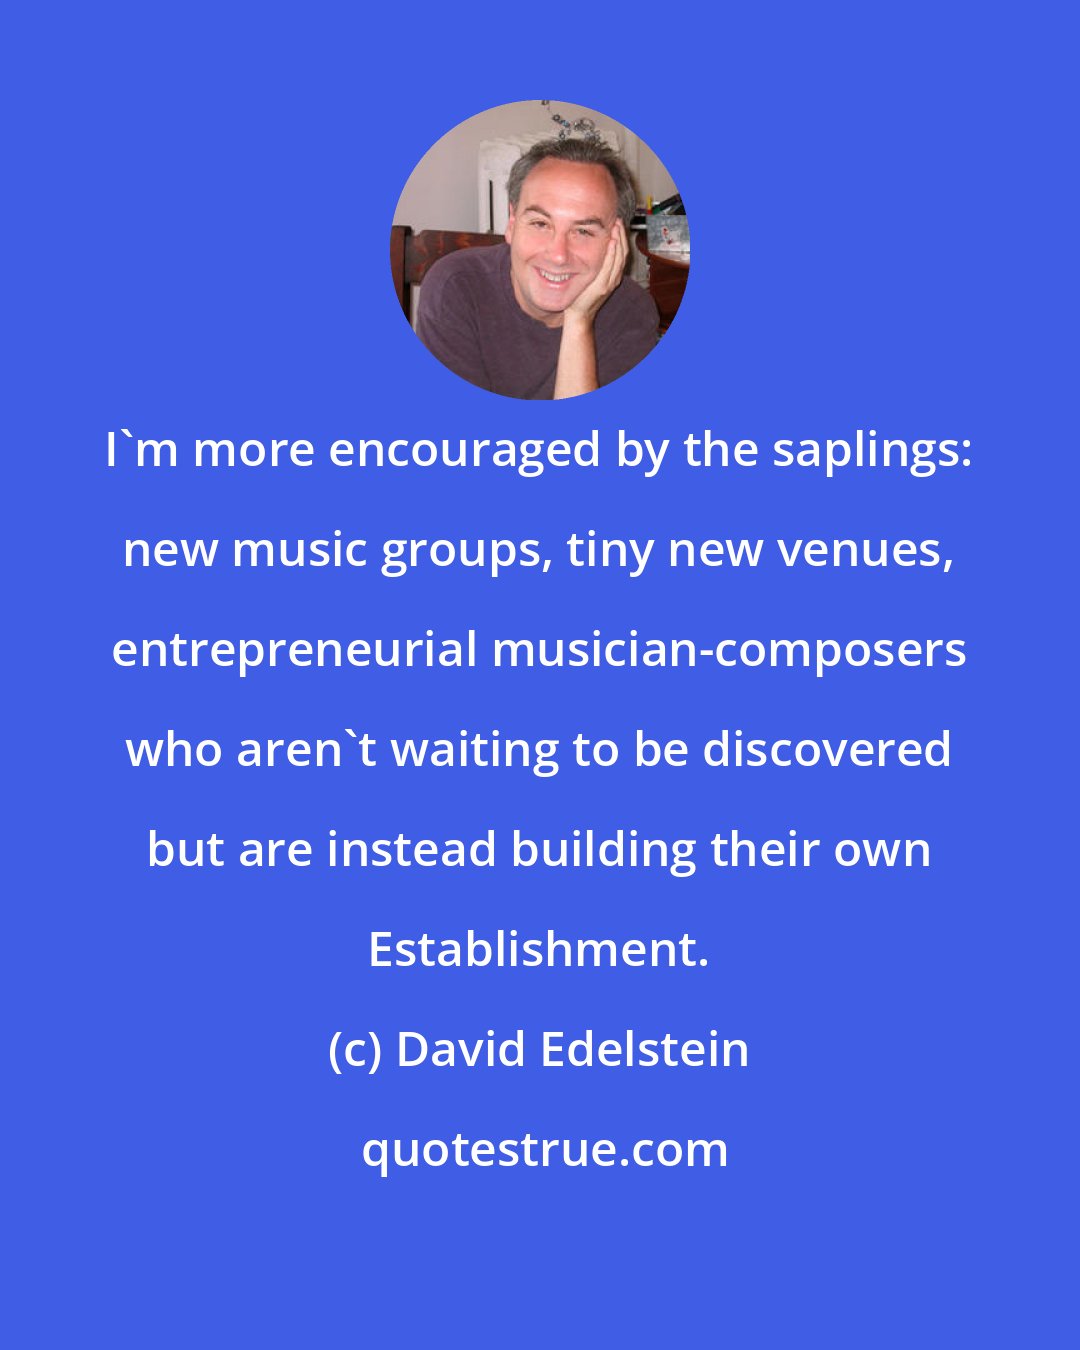 David Edelstein: I'm more encouraged by the saplings: new music groups, tiny new venues, entrepreneurial musician-composers who aren't waiting to be discovered but are instead building their own Establishment.